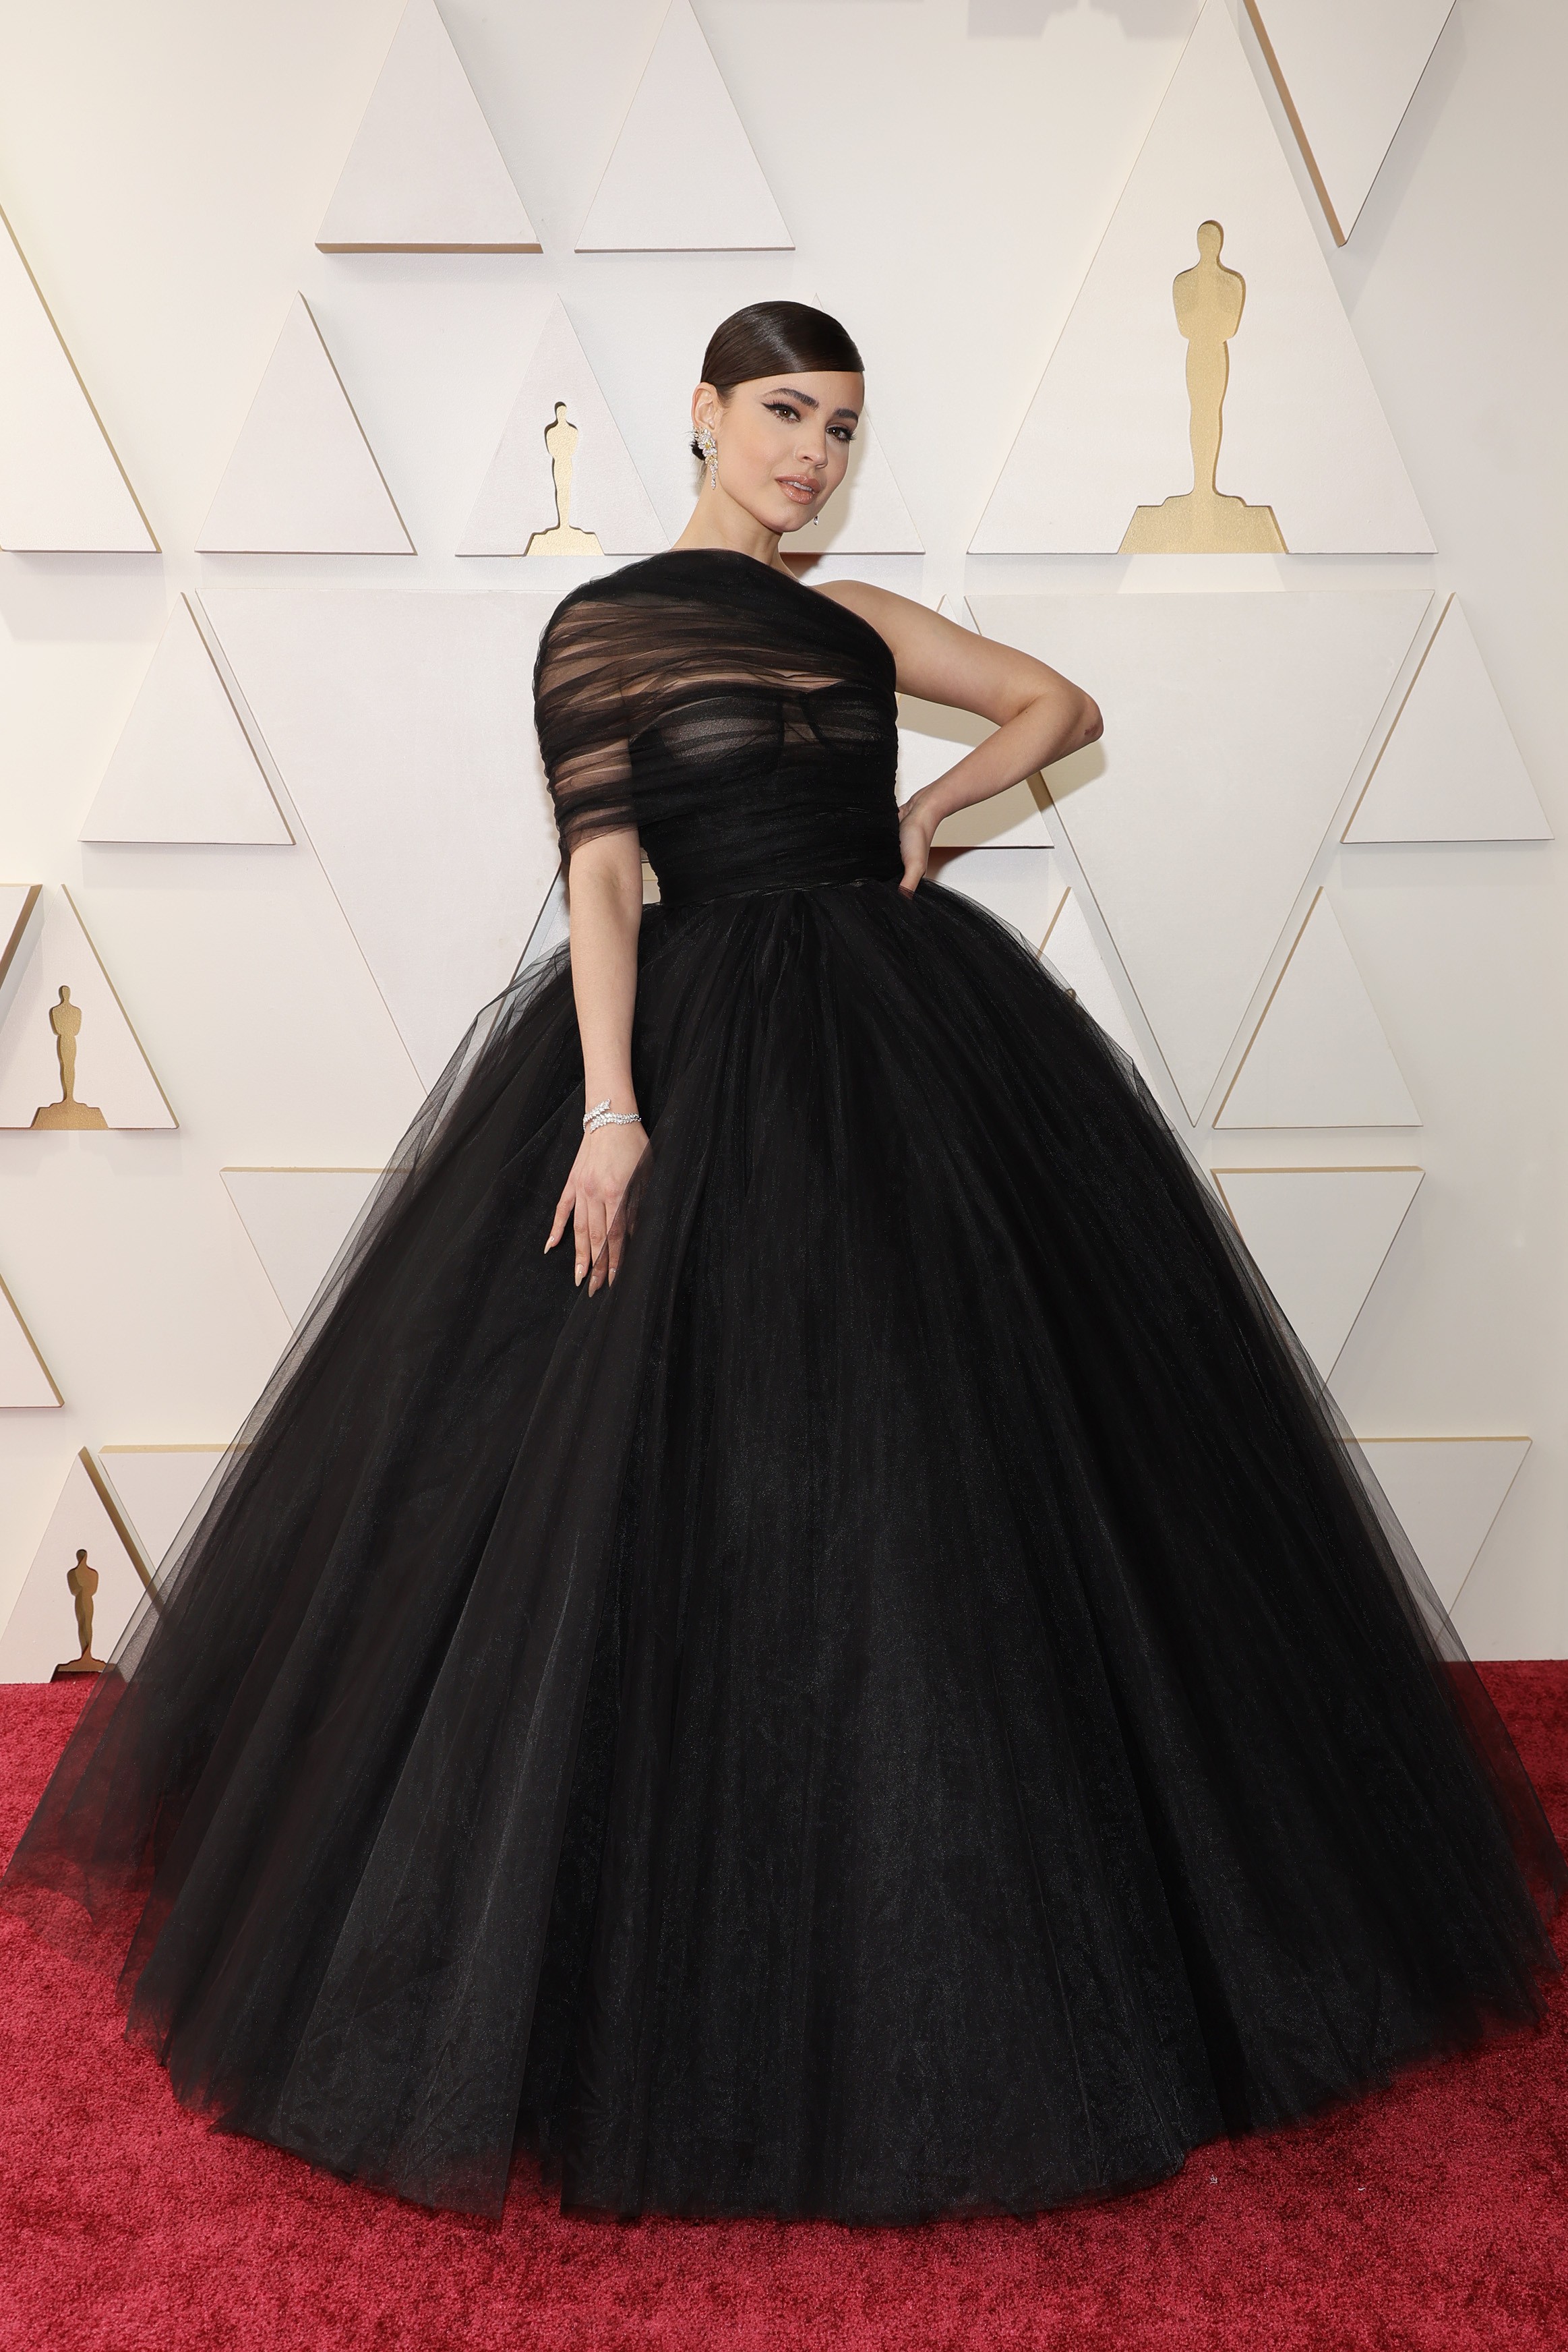 HOLLYWOOD, CALIFORNIA - MARCH 27: Sofia Carson attends the 94th Annual Academy Awards at Hollywood and Highland on March 27, 2022 in Hollywood, California. (Photo by Mike Coppola/Getty Images) (Foto: Getty Images)